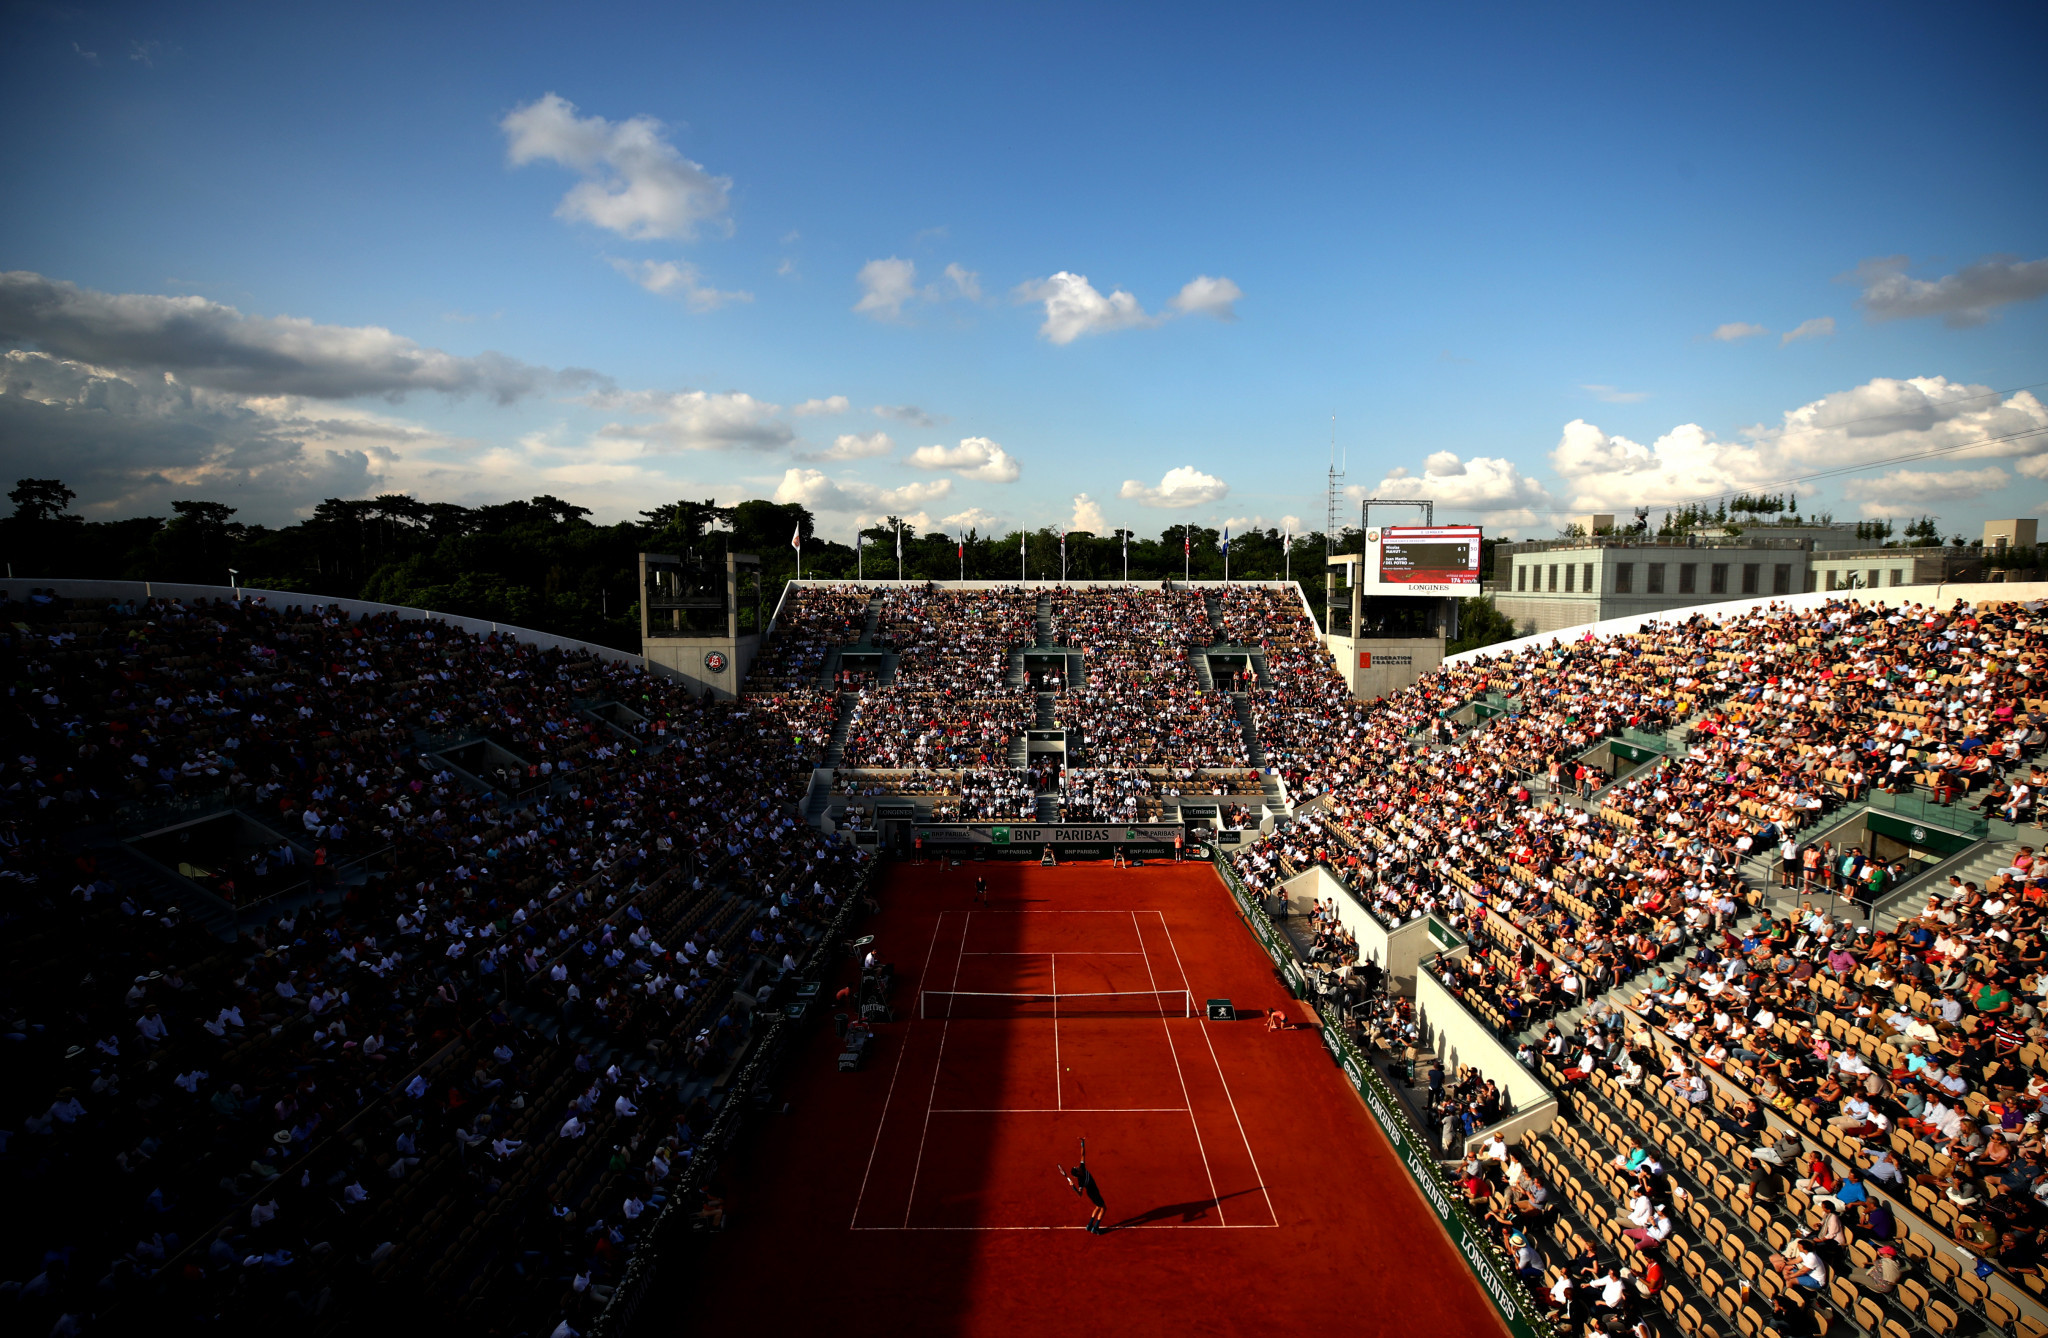 Court Suzanne Lenglen's roof is to continue its work after the 2023 French Open for final touches before next year's Olympic and Paralympic Games in Paris ©Getty Images